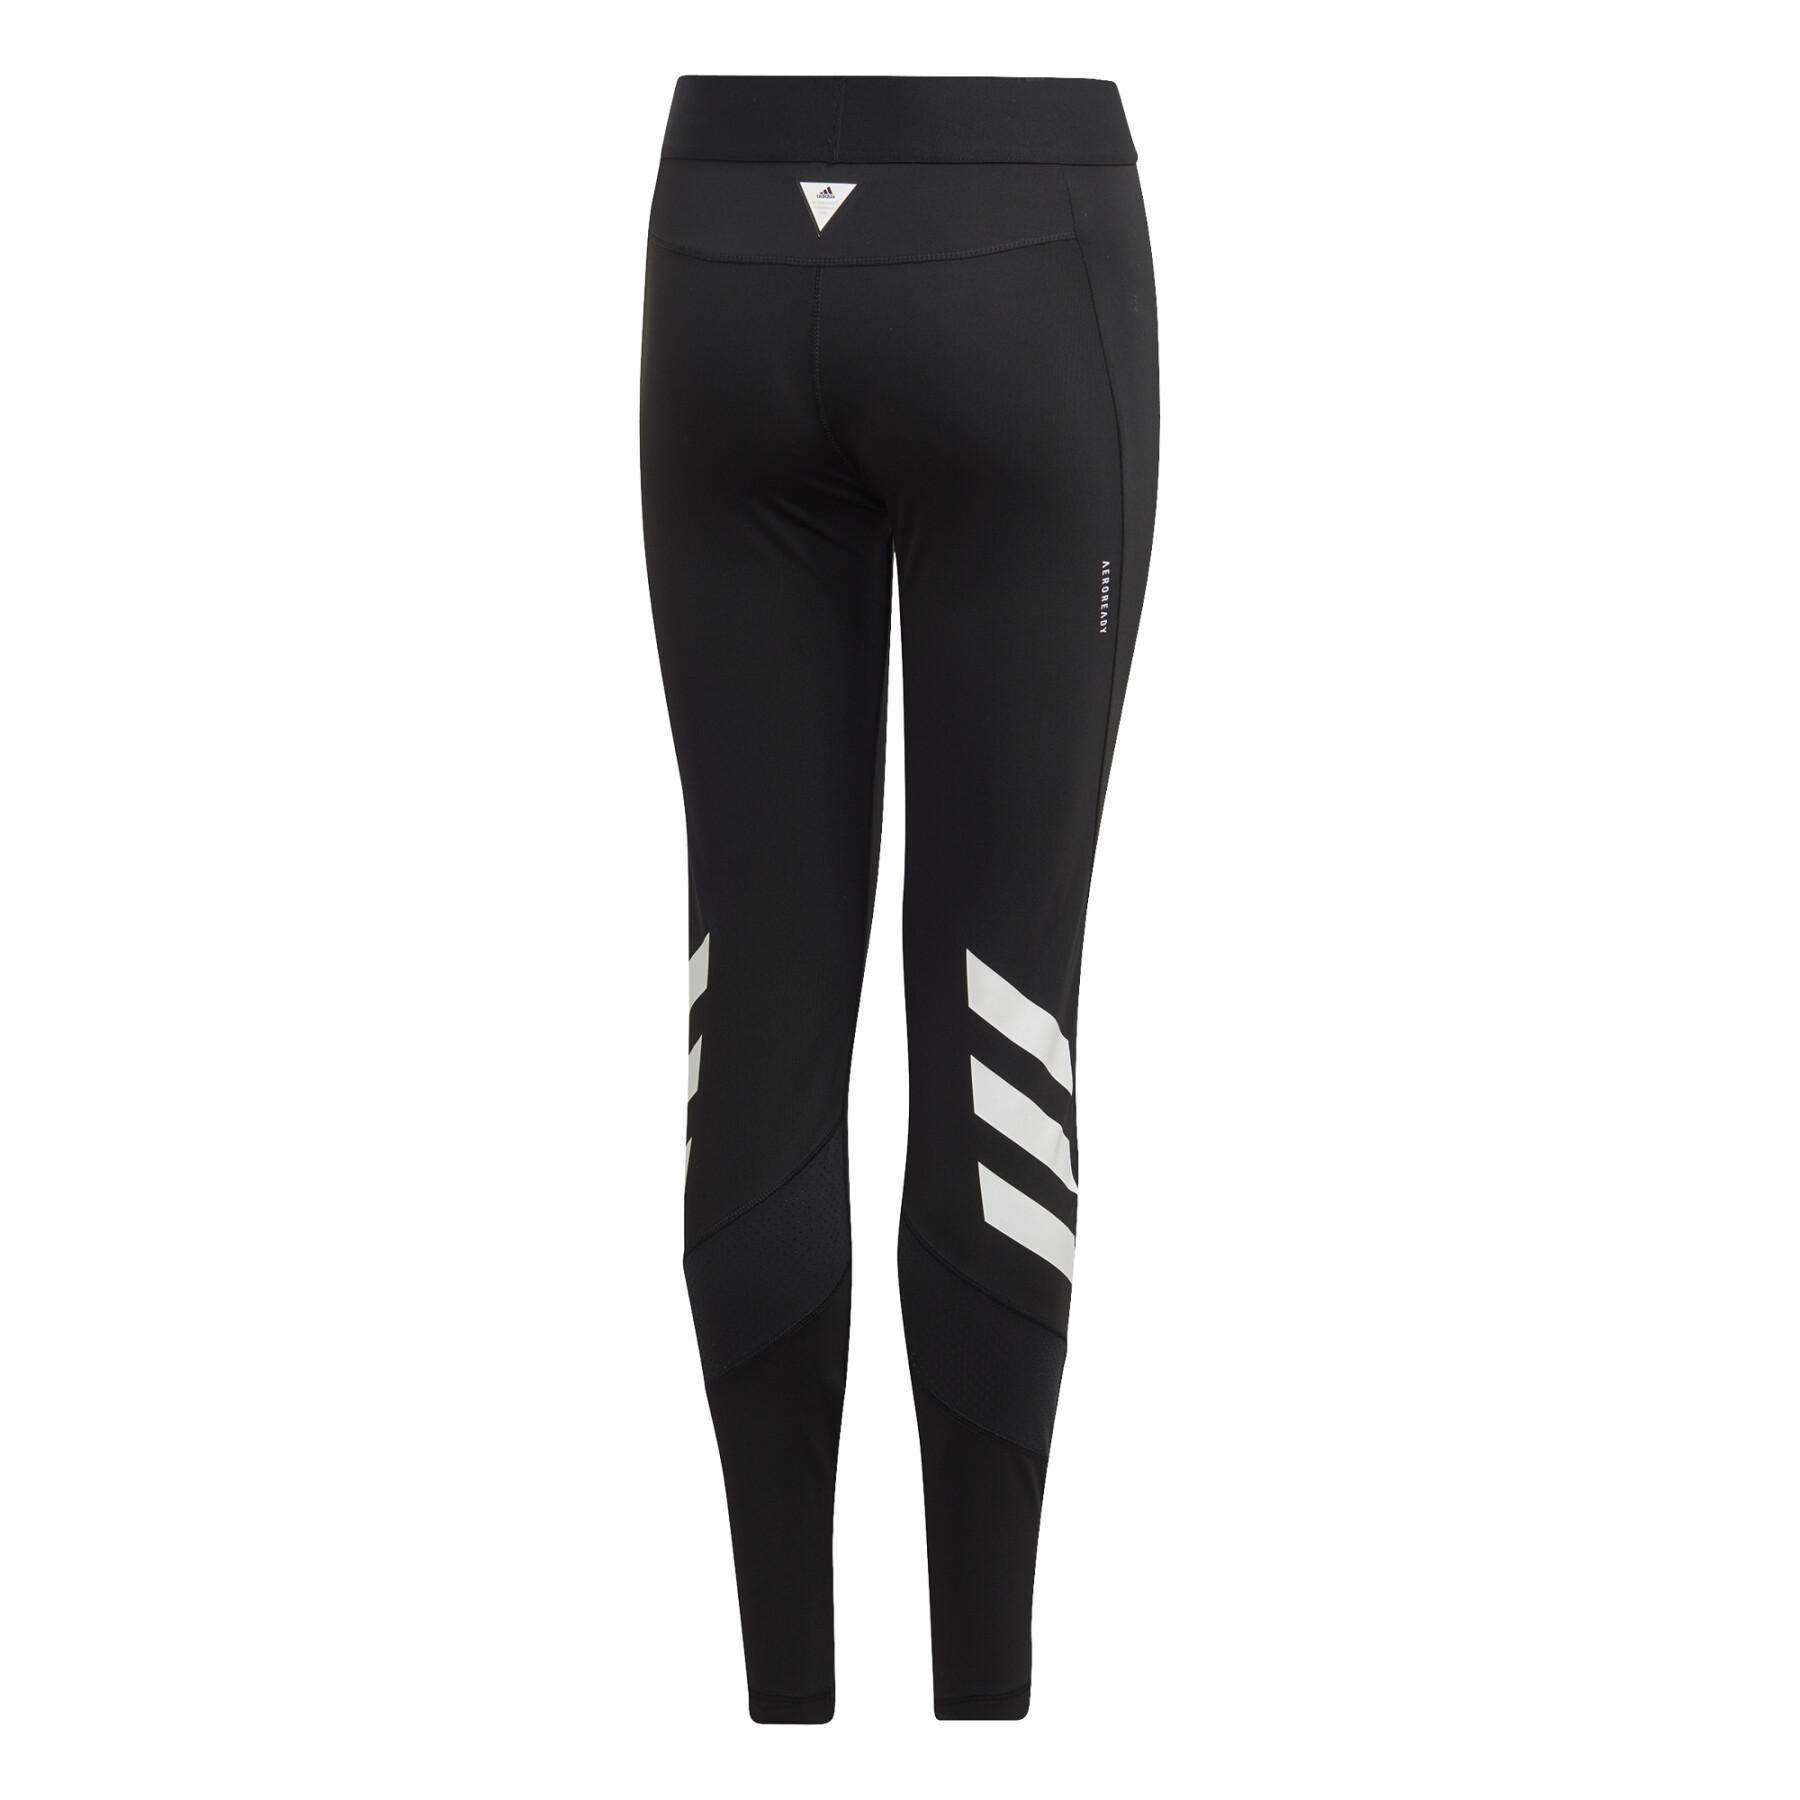 Legging dochter adidas The Future Today